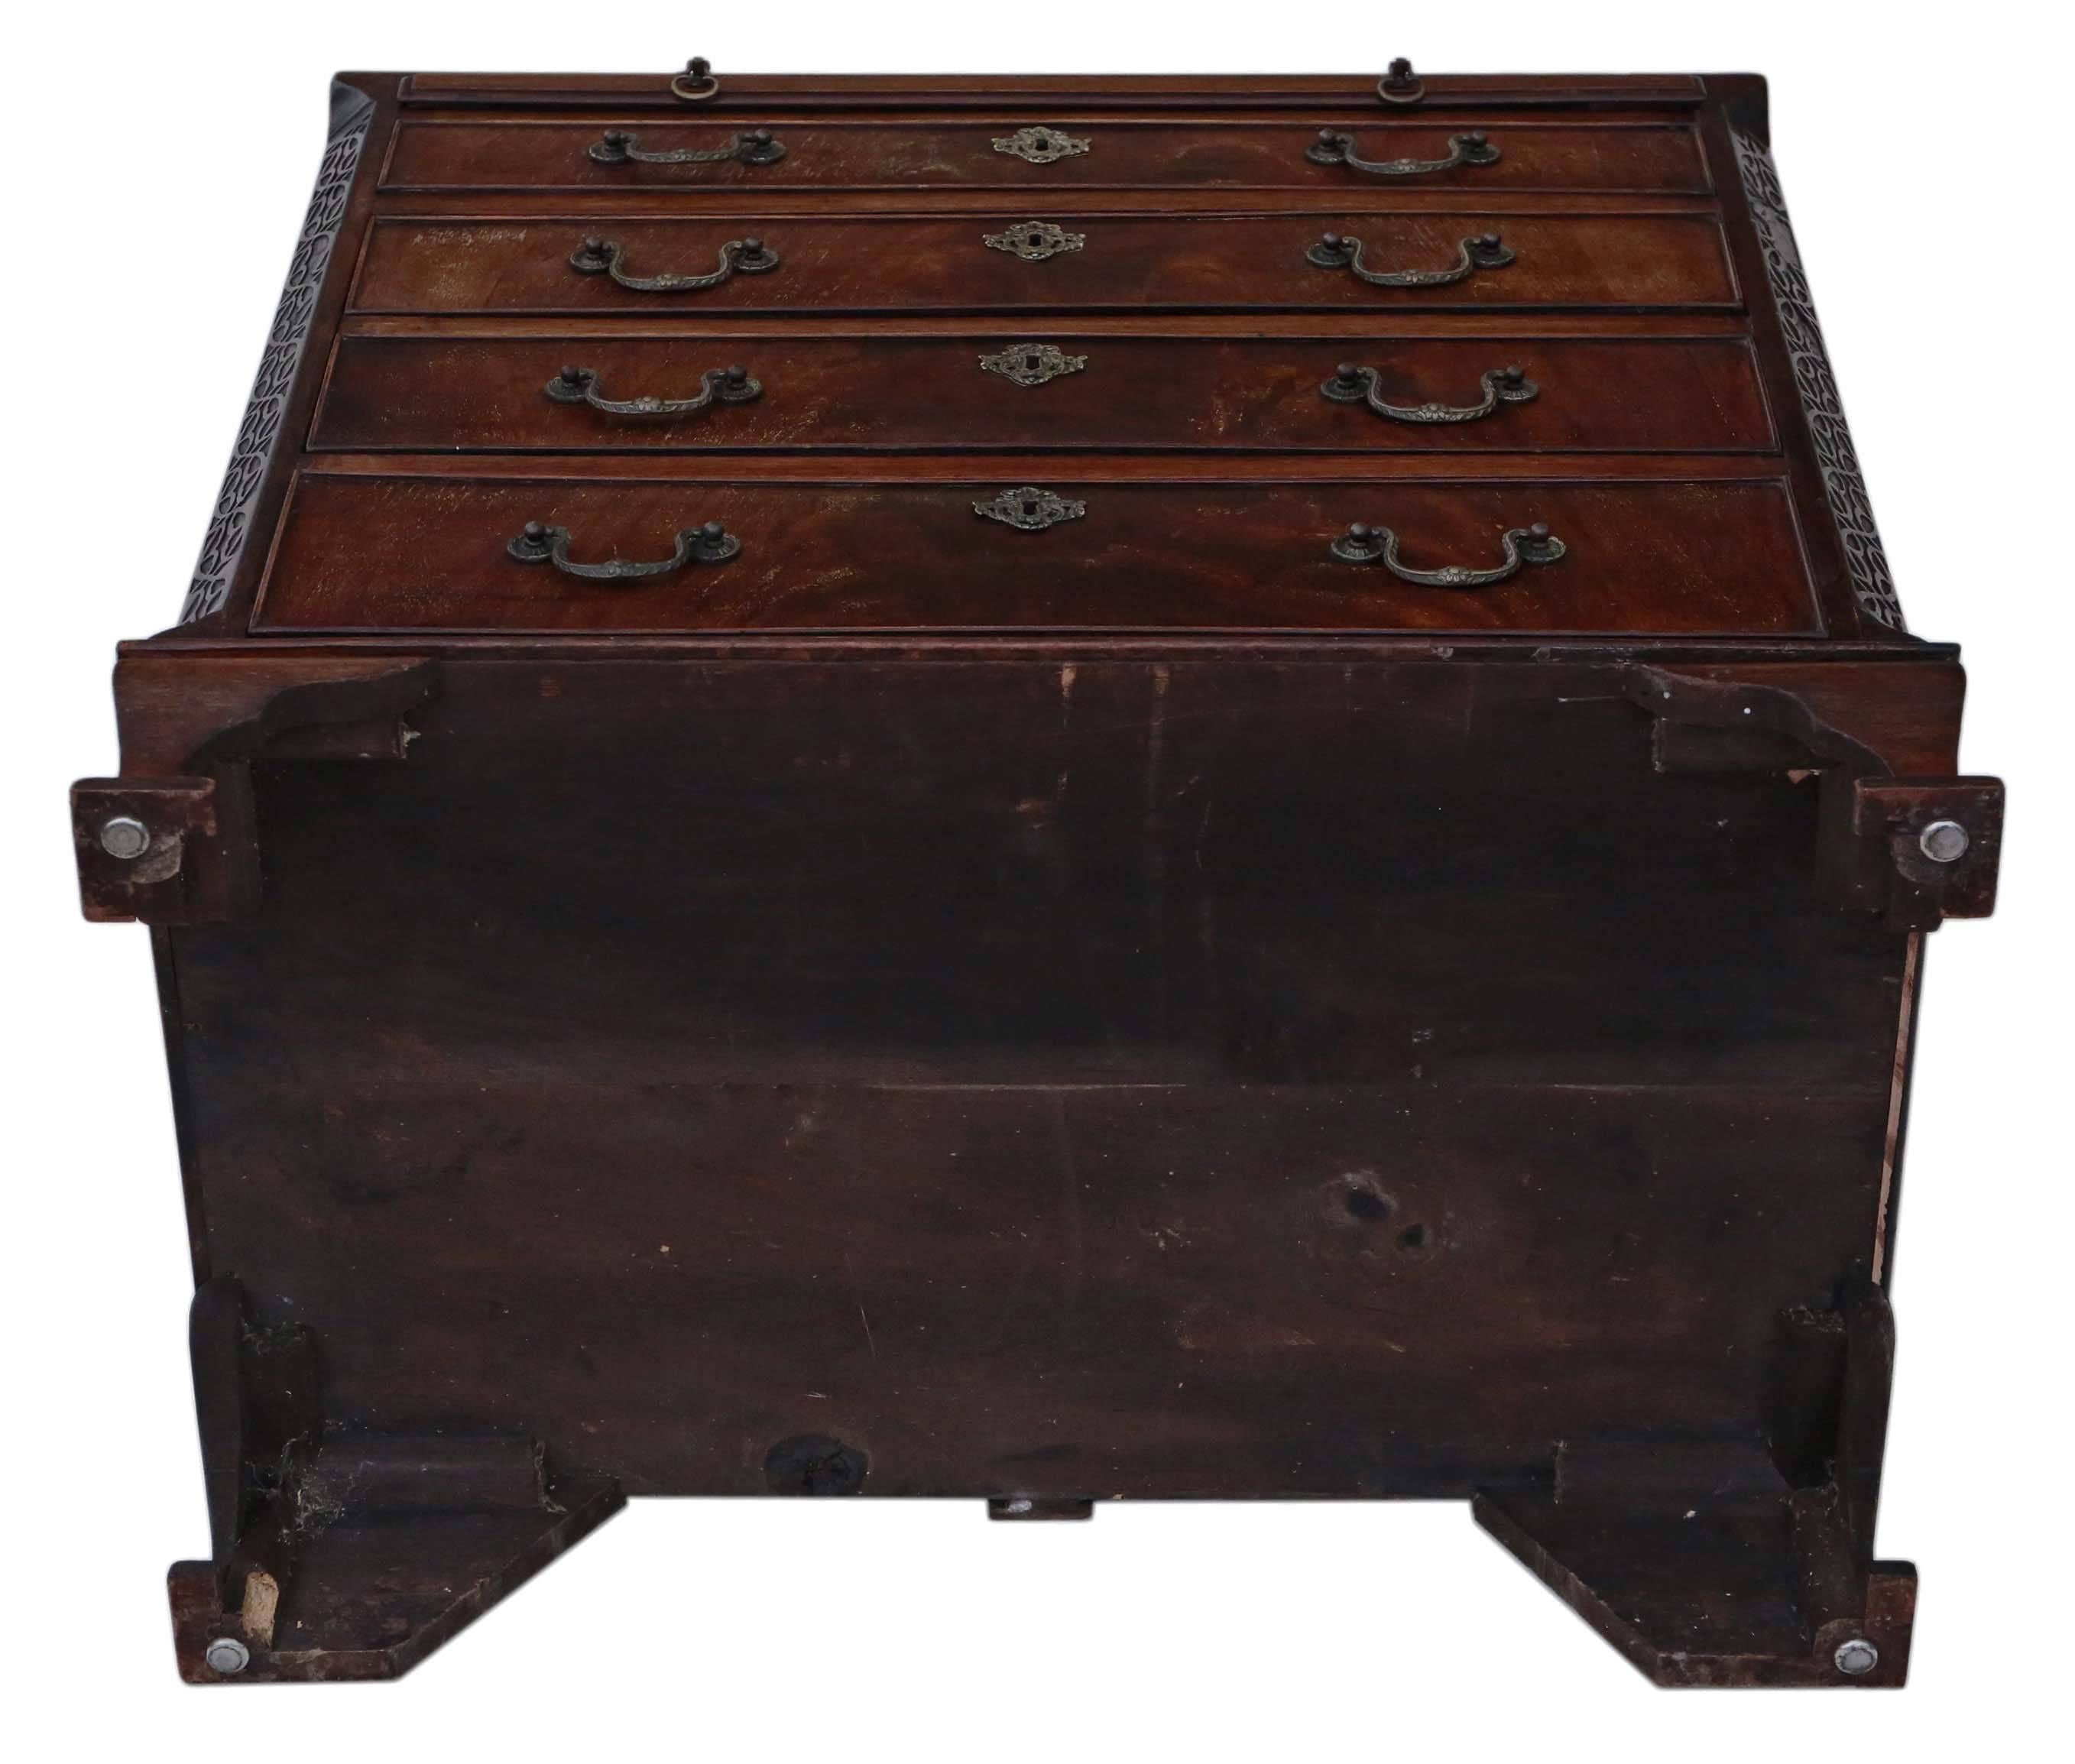 Oak Antique Quality Small Georgian Revival, circa 1910 Mahogany Chest of Drawers For Sale